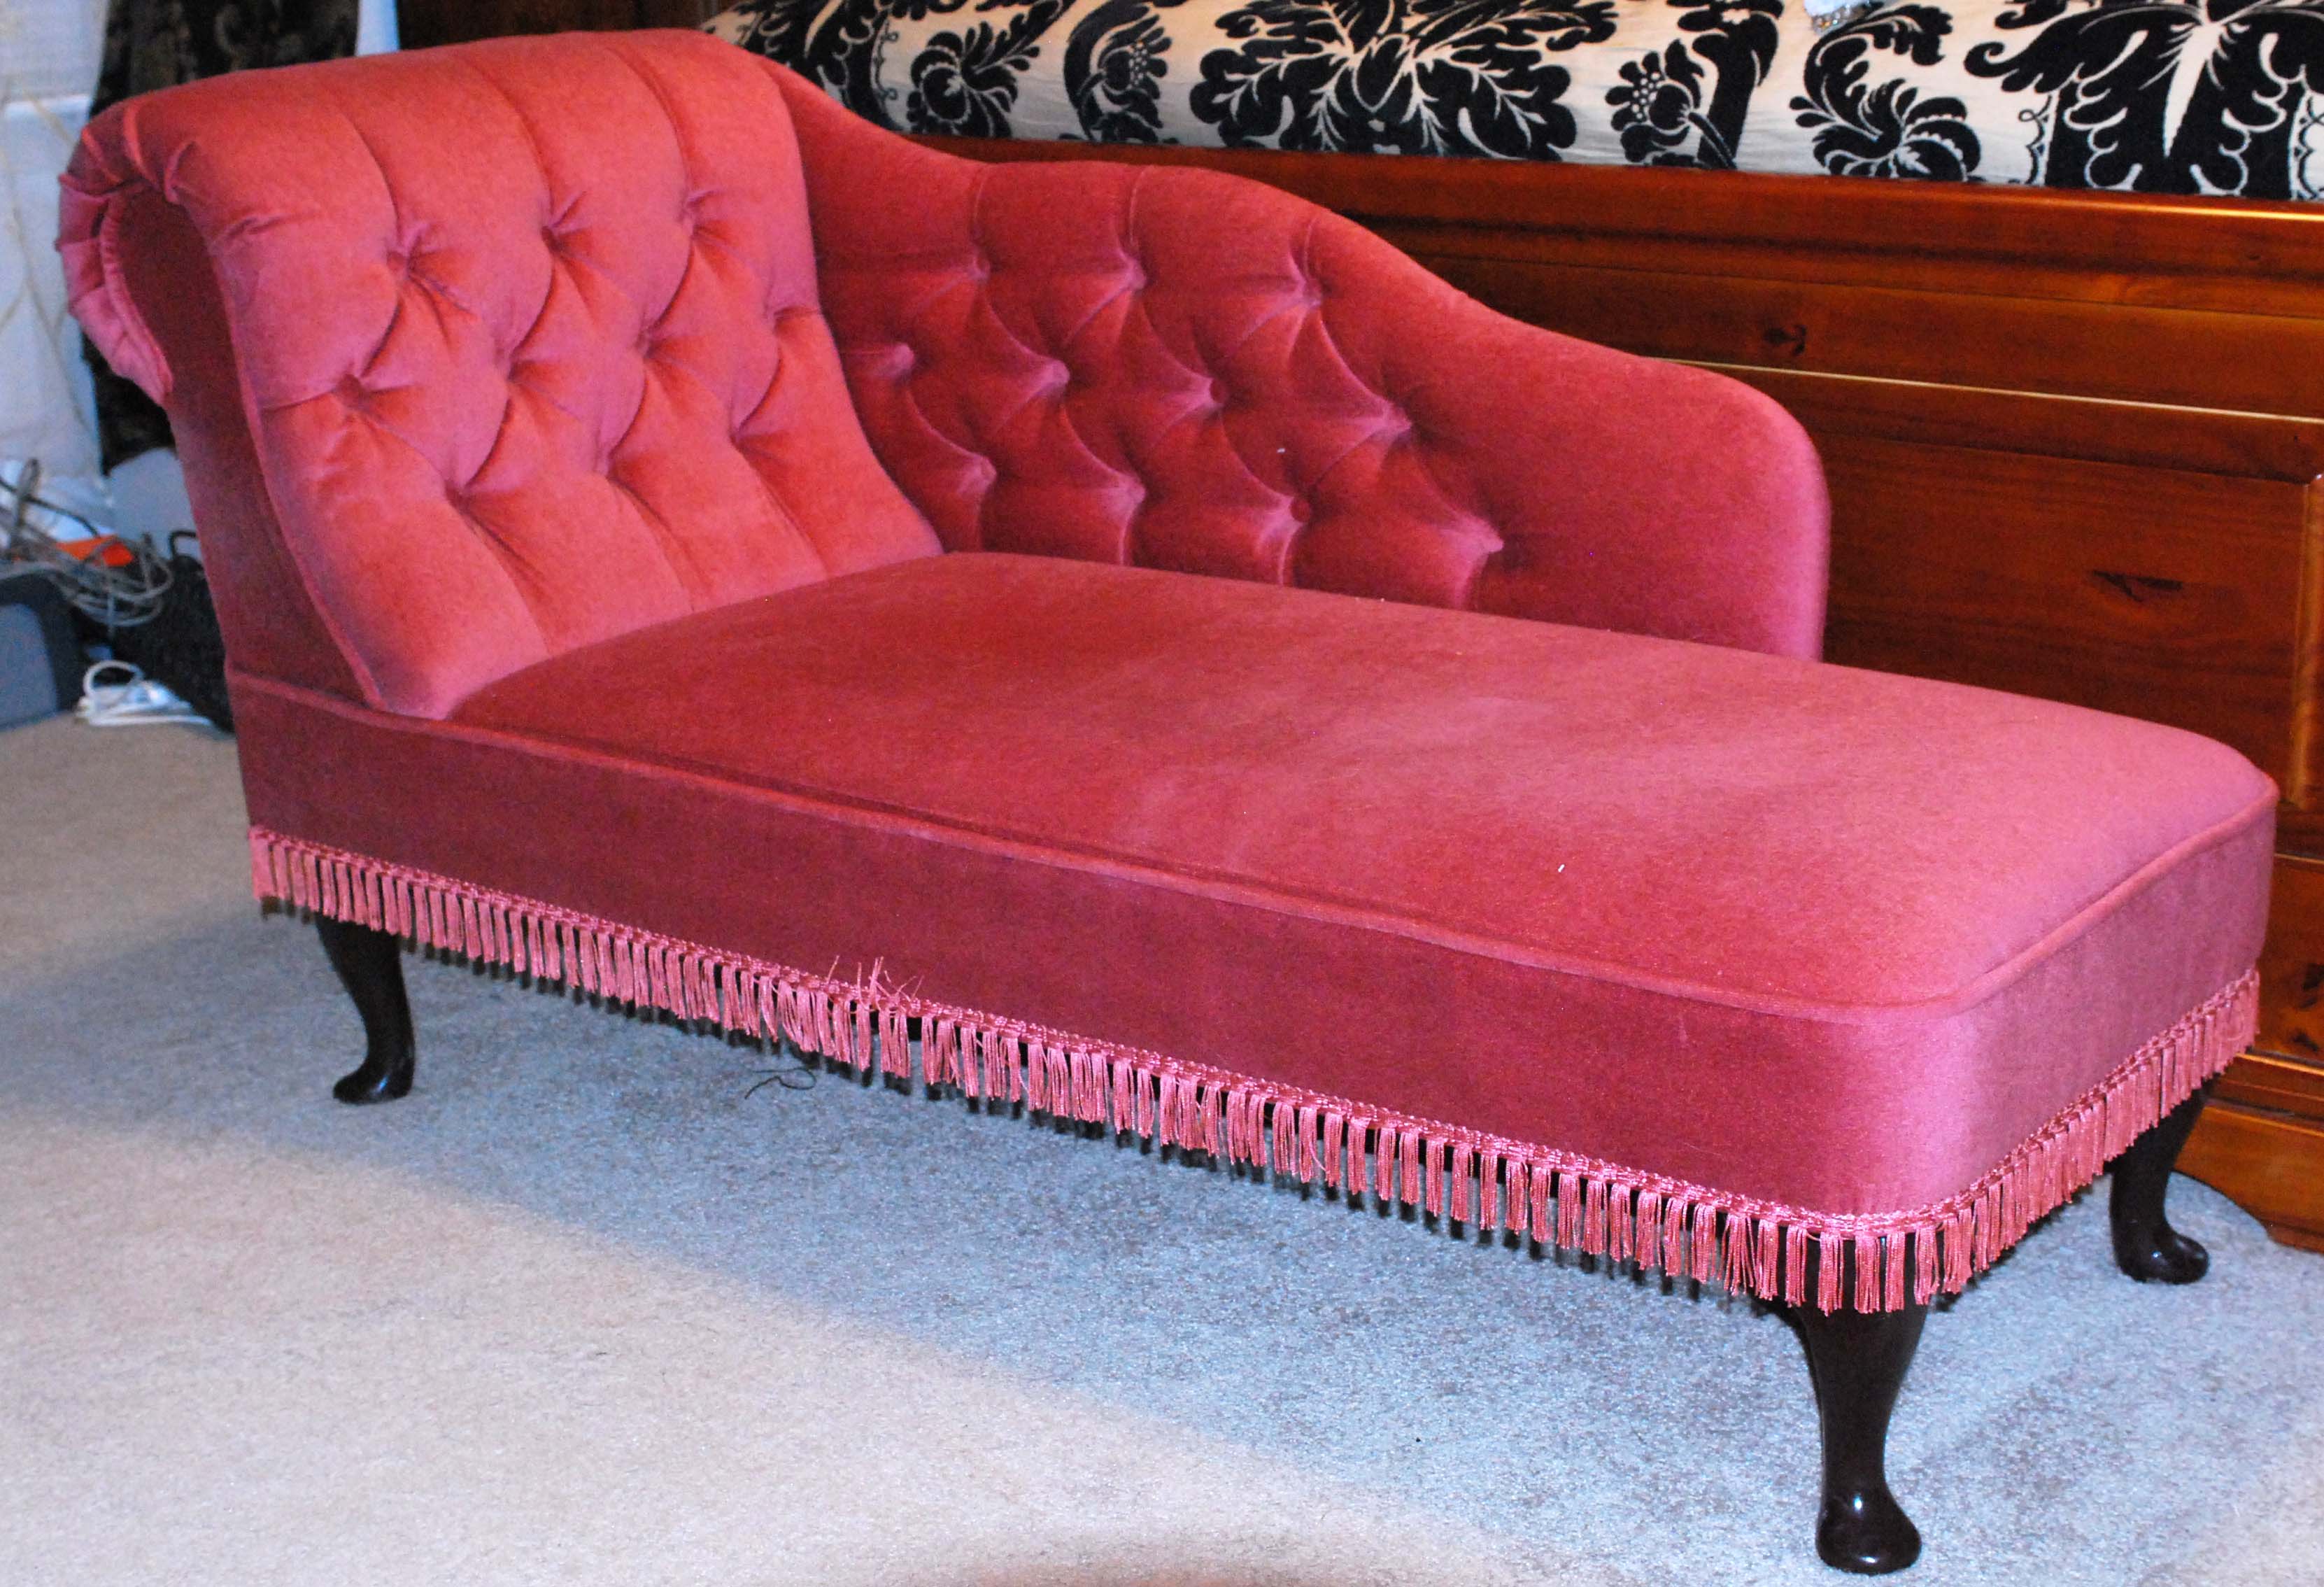 Chaise Lounge For Sale | Antiques.com | Classifieds